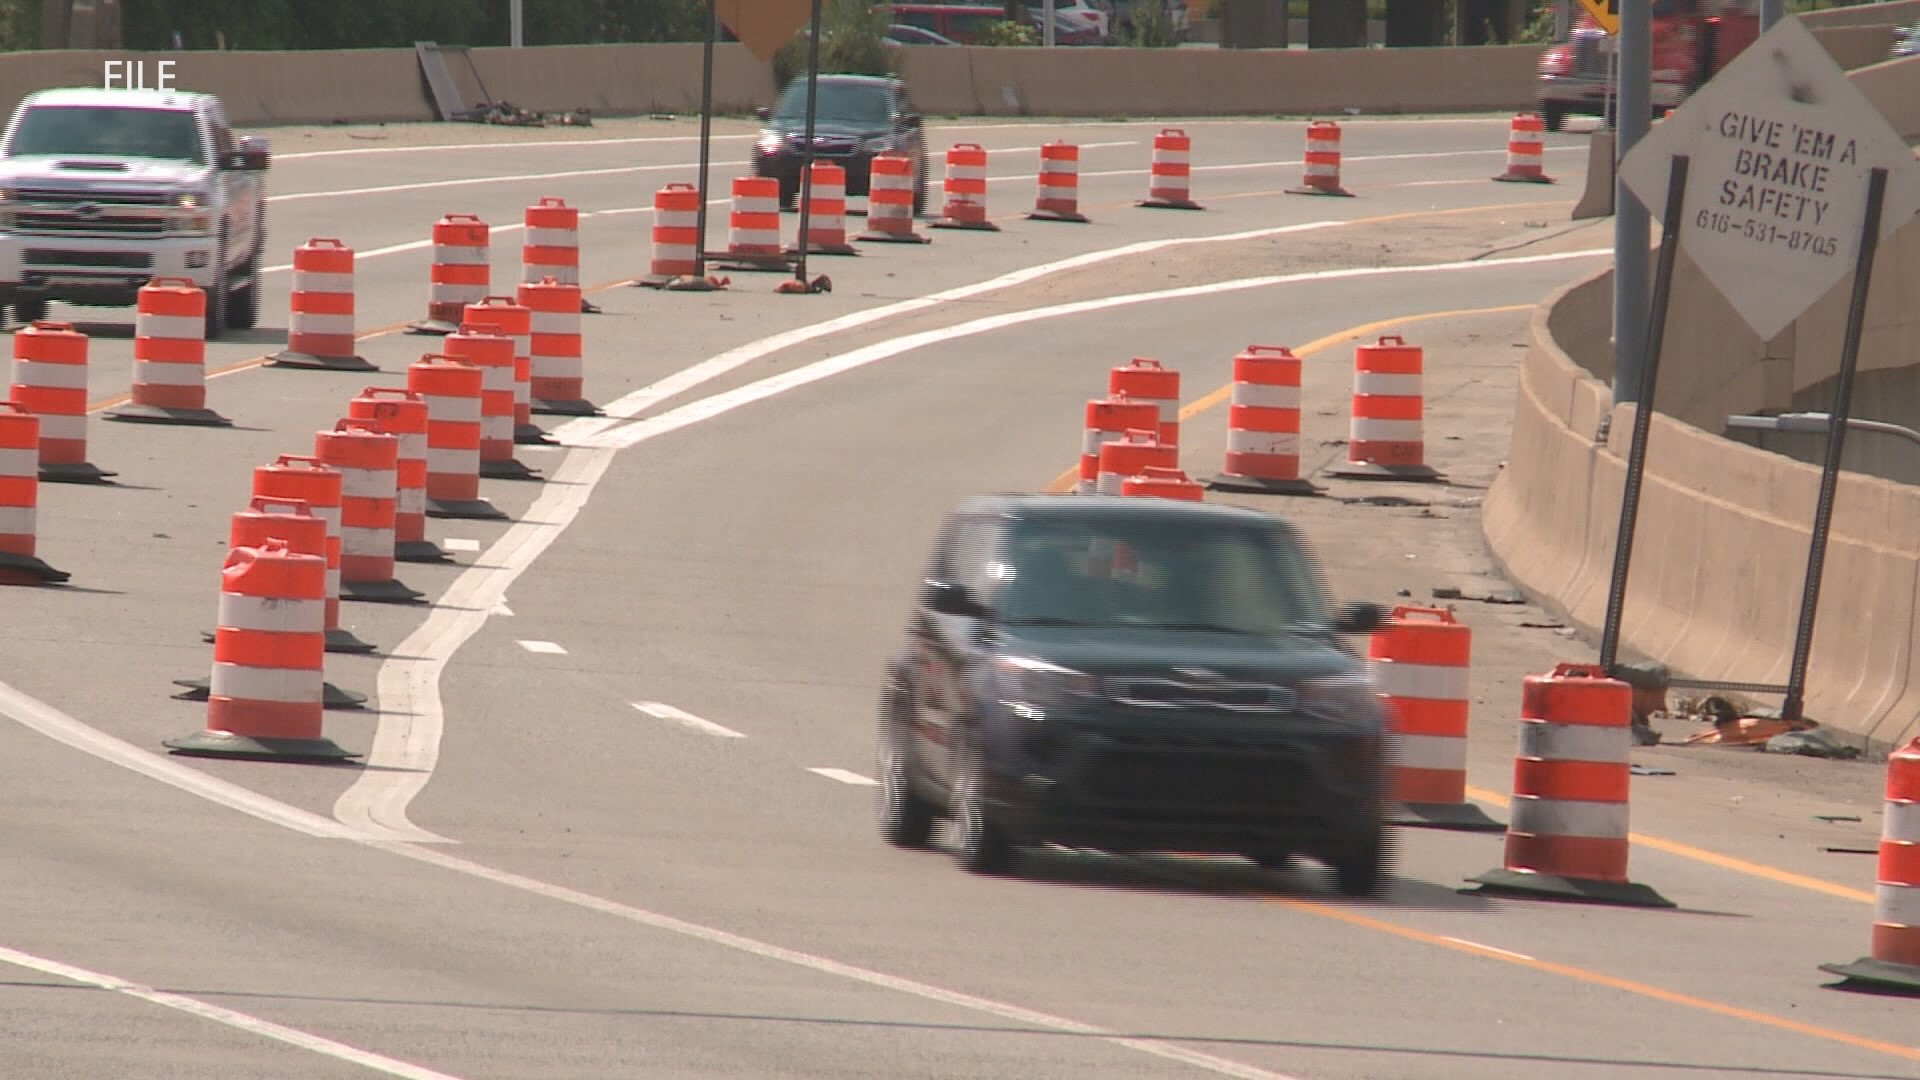 MDOT is also seeking public input about the construction projects headed to Michigan in the coming months.